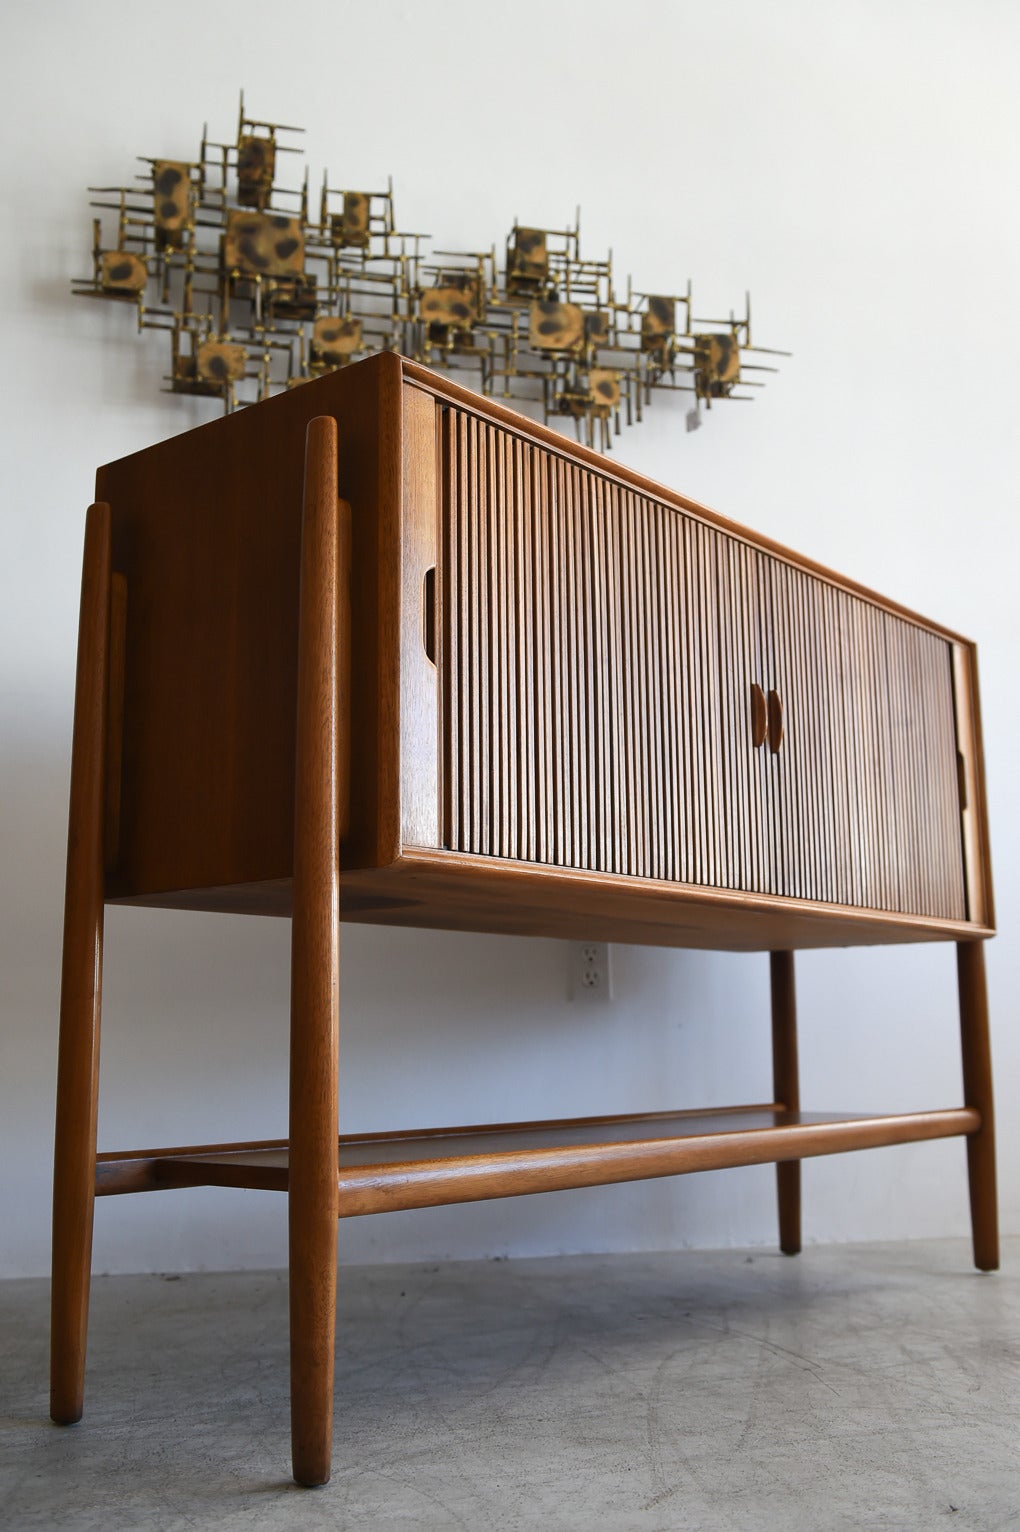 Impressive walnut tambour door walnut credenza designed by Barney Flagg for Drexel's Parallel line of furniture.

Beautiful original condition, hardly any wear at all. Sliding tambour doors slide smooth with no sticking and the credenza still